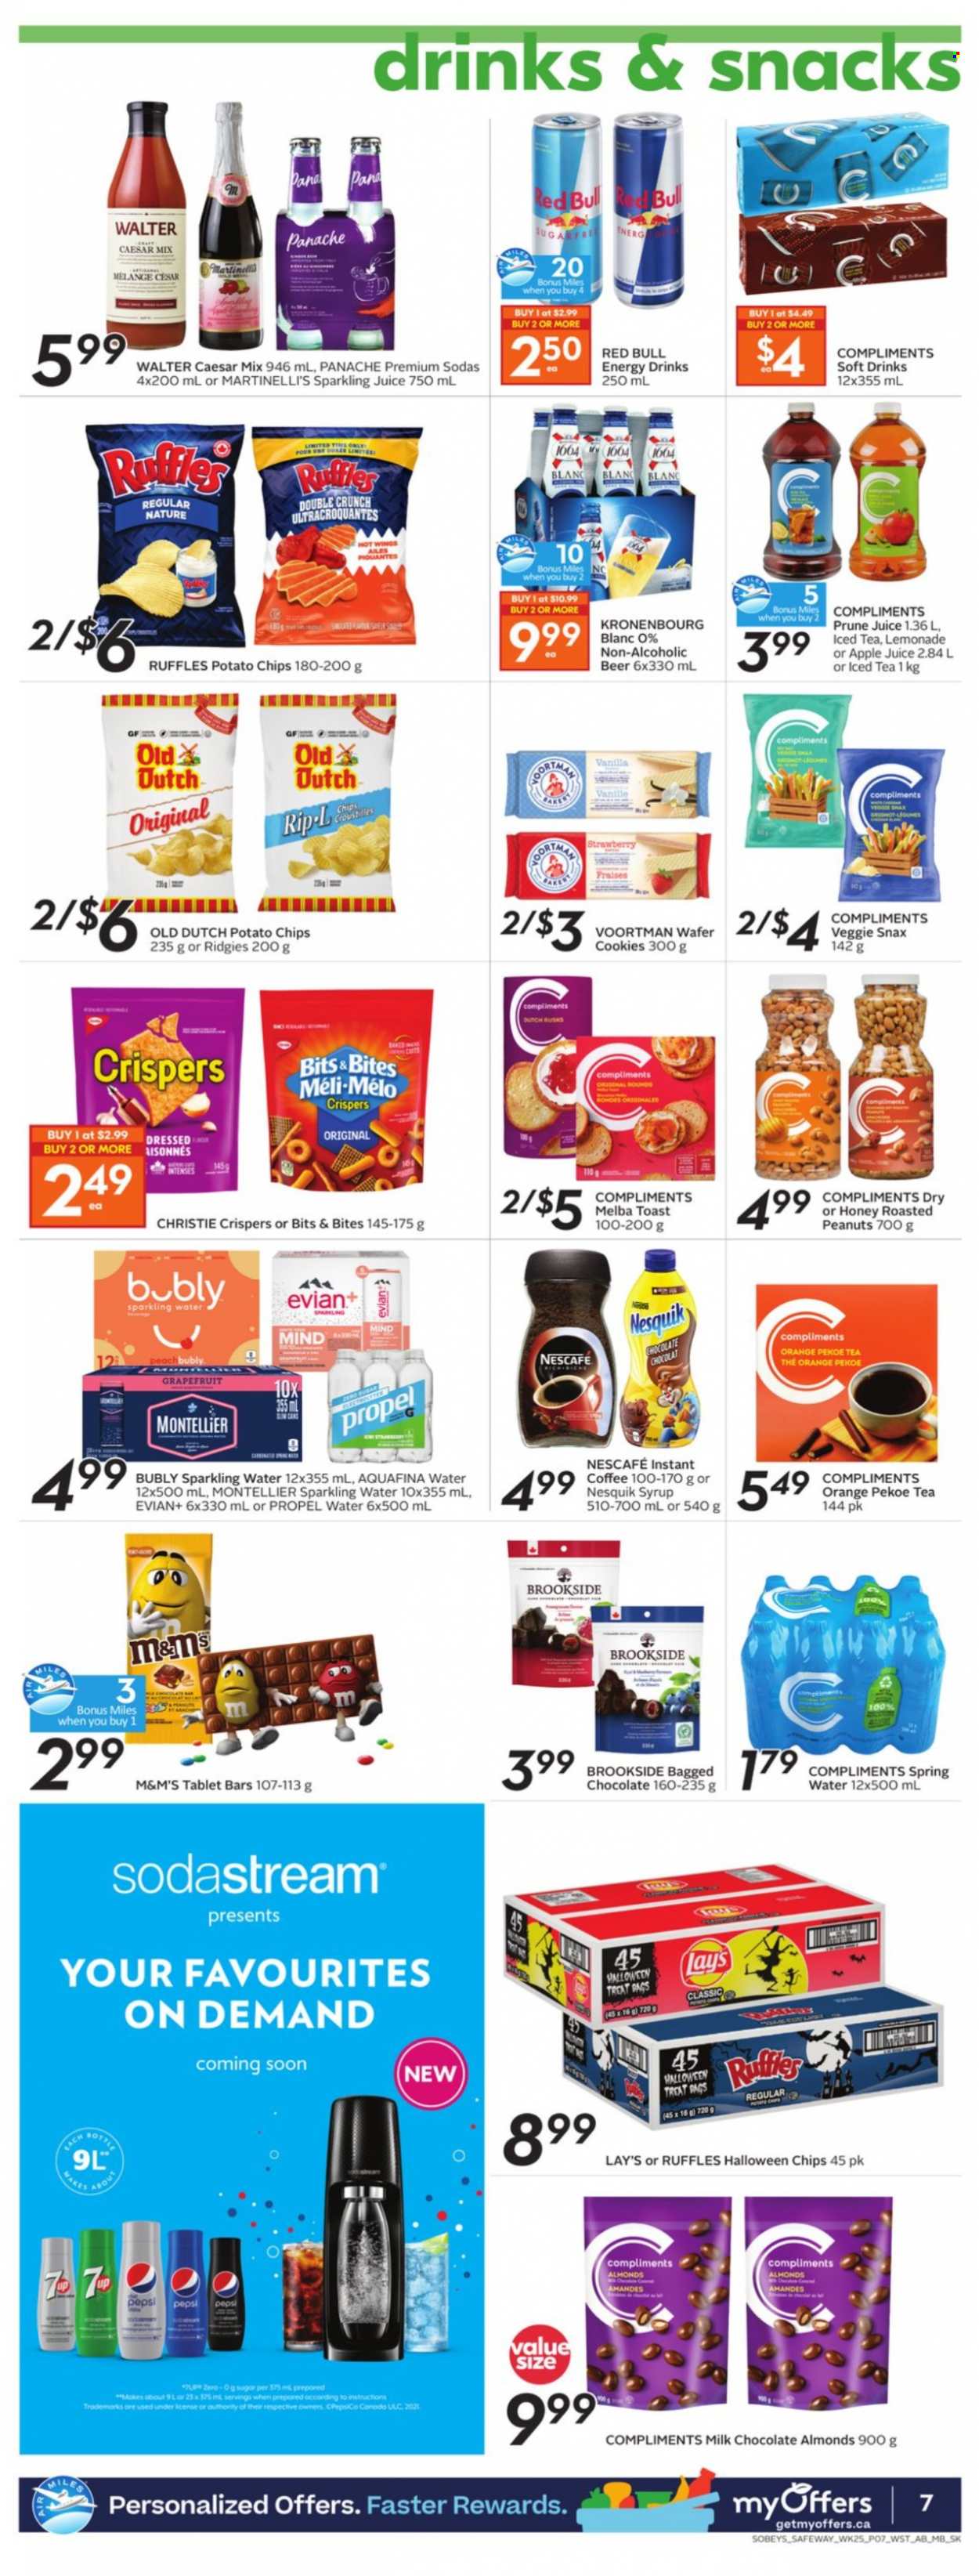 thumbnail - Safeway Flyer - October 14, 2021 - October 20, 2021 - Sales products - rusks, grapefruits, cookies, milk chocolate, wafers, chocolate, potato chips, Lay’s, Ruffles, syrup, roasted peanuts, peanuts, apple juice, lemonade, Pepsi, juice, energy drink, ice tea, soft drink, Red Bull, sparkling juice, Aquafina, Evian, instant coffee, beer, Nesquik, chips, Nescafé, oranges, M&M's. Page 9.